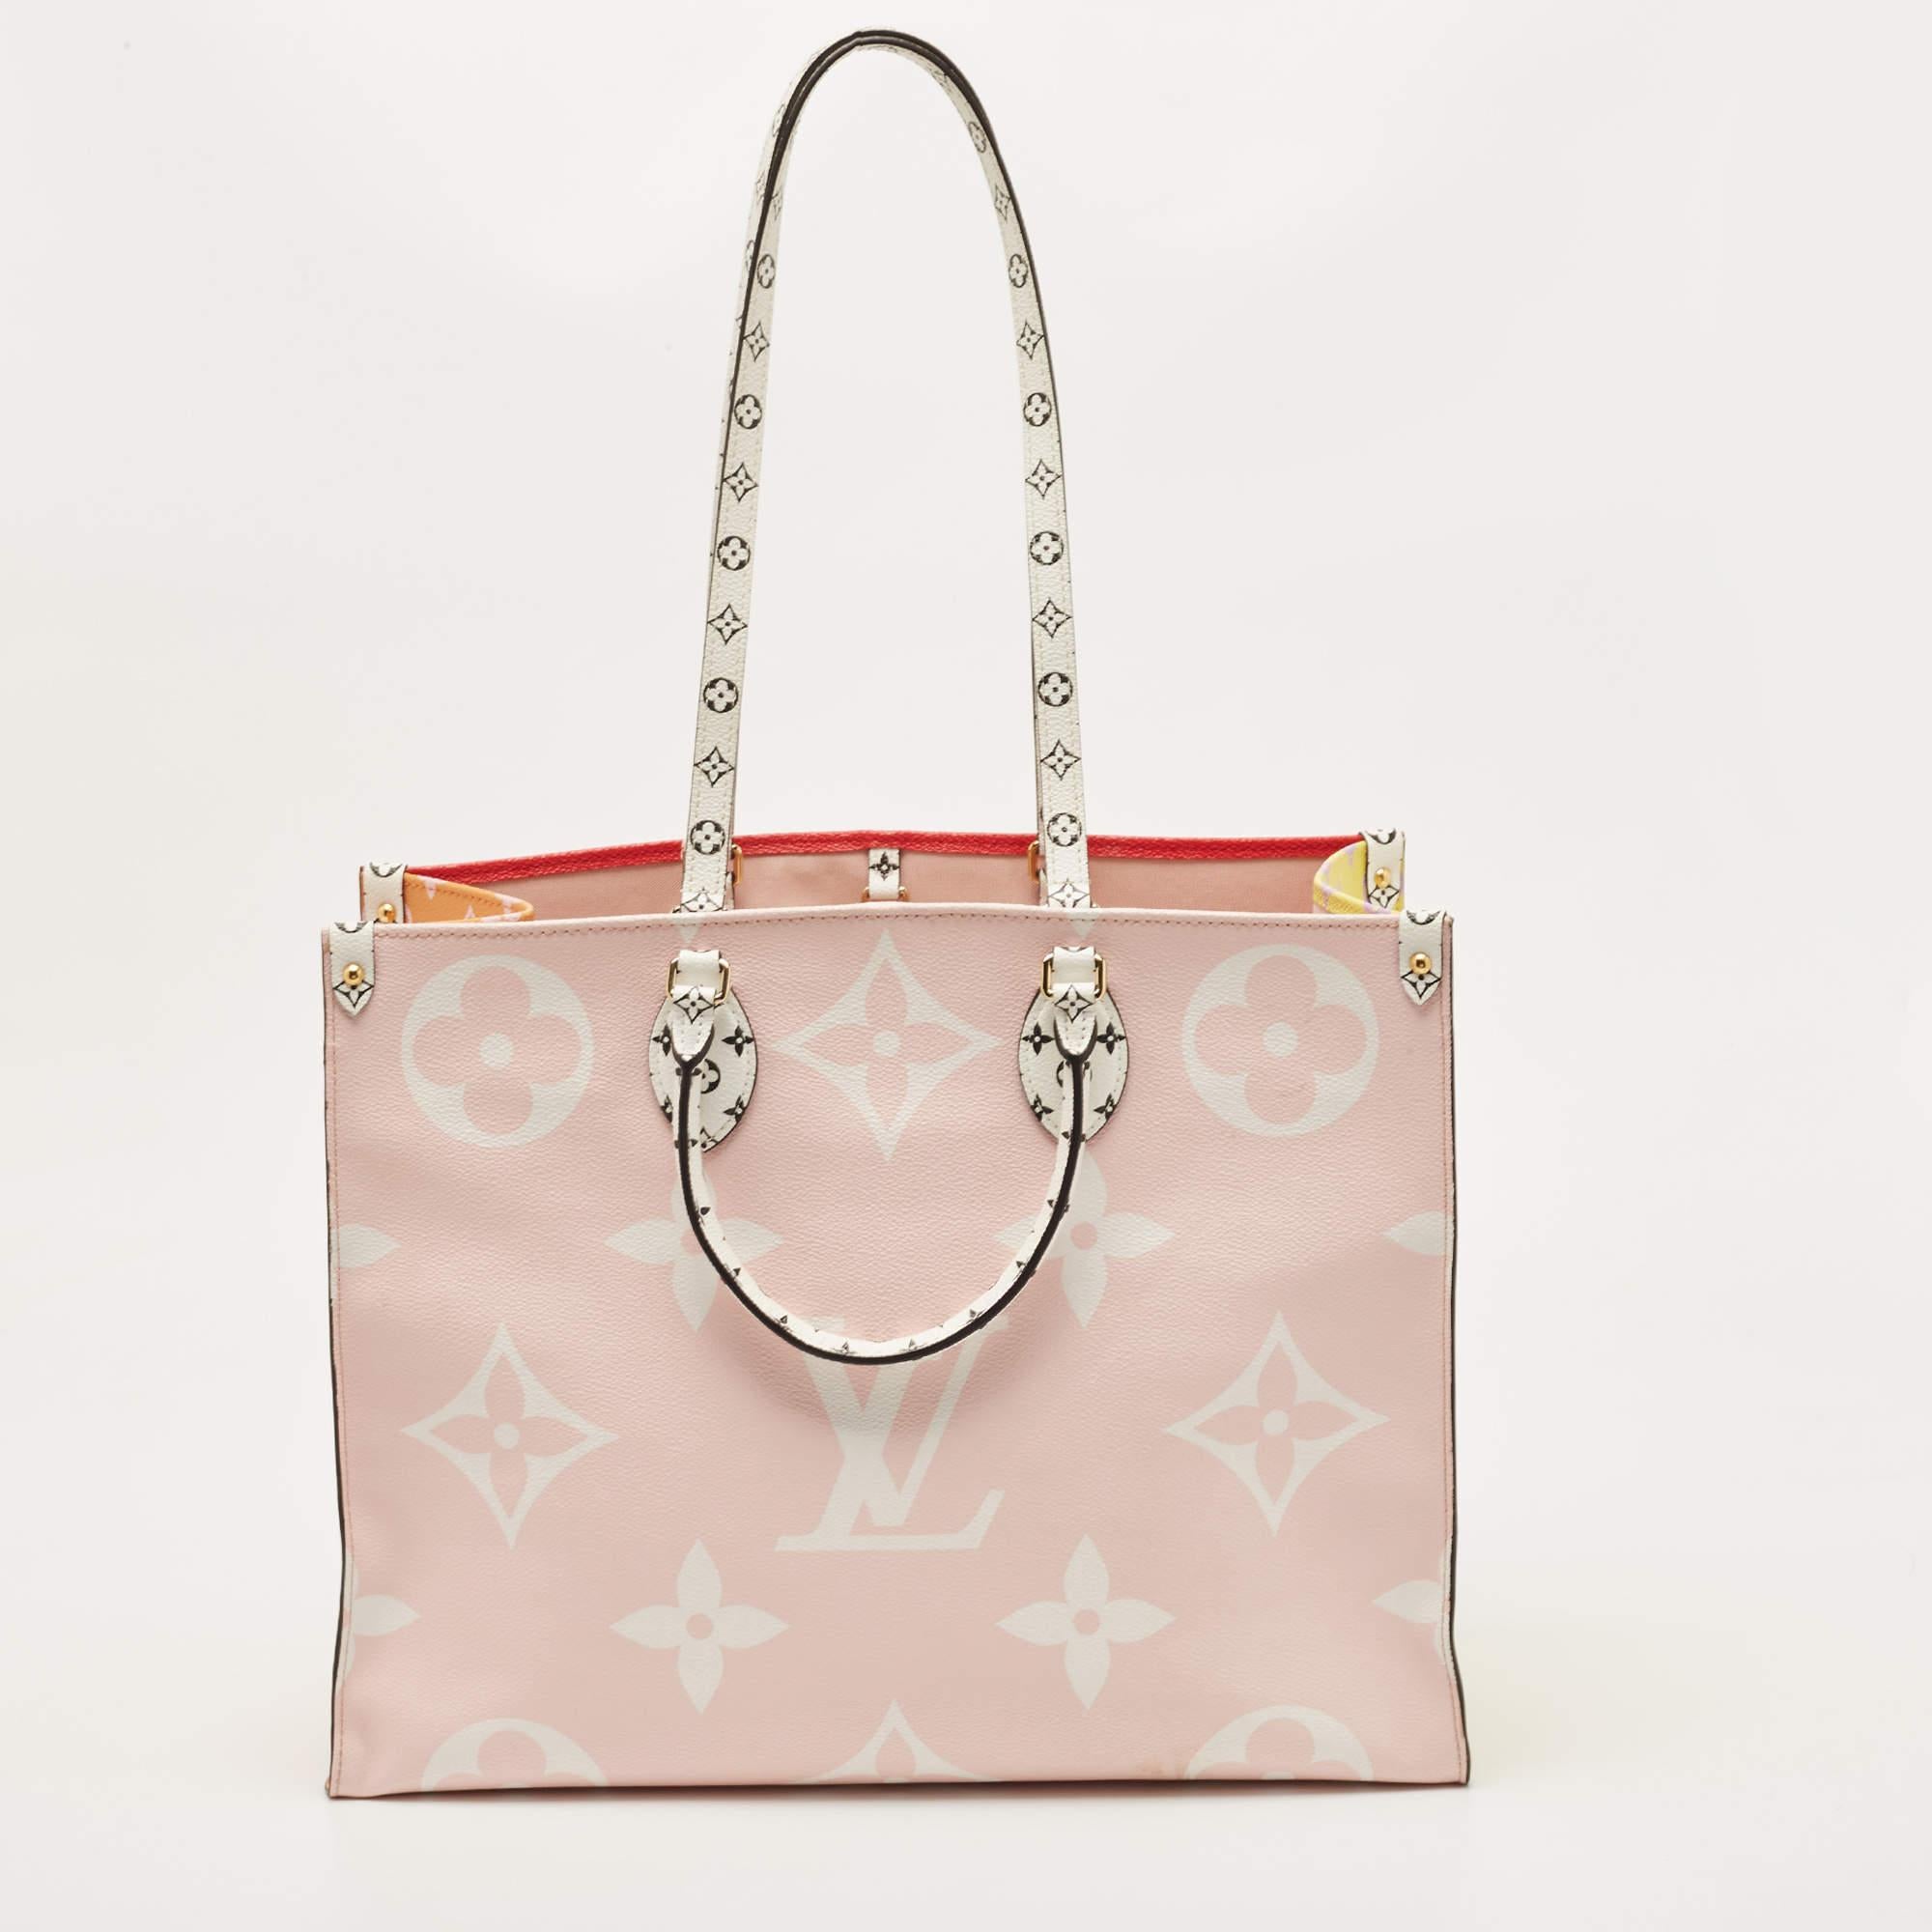 Thoughtful details, high quality, and everyday convenience mark this Onthego bag for women by Louis Vuitton. The bag is sewn with skill to deliver a refined look and an impeccable finish.

Includes: Info Booklet